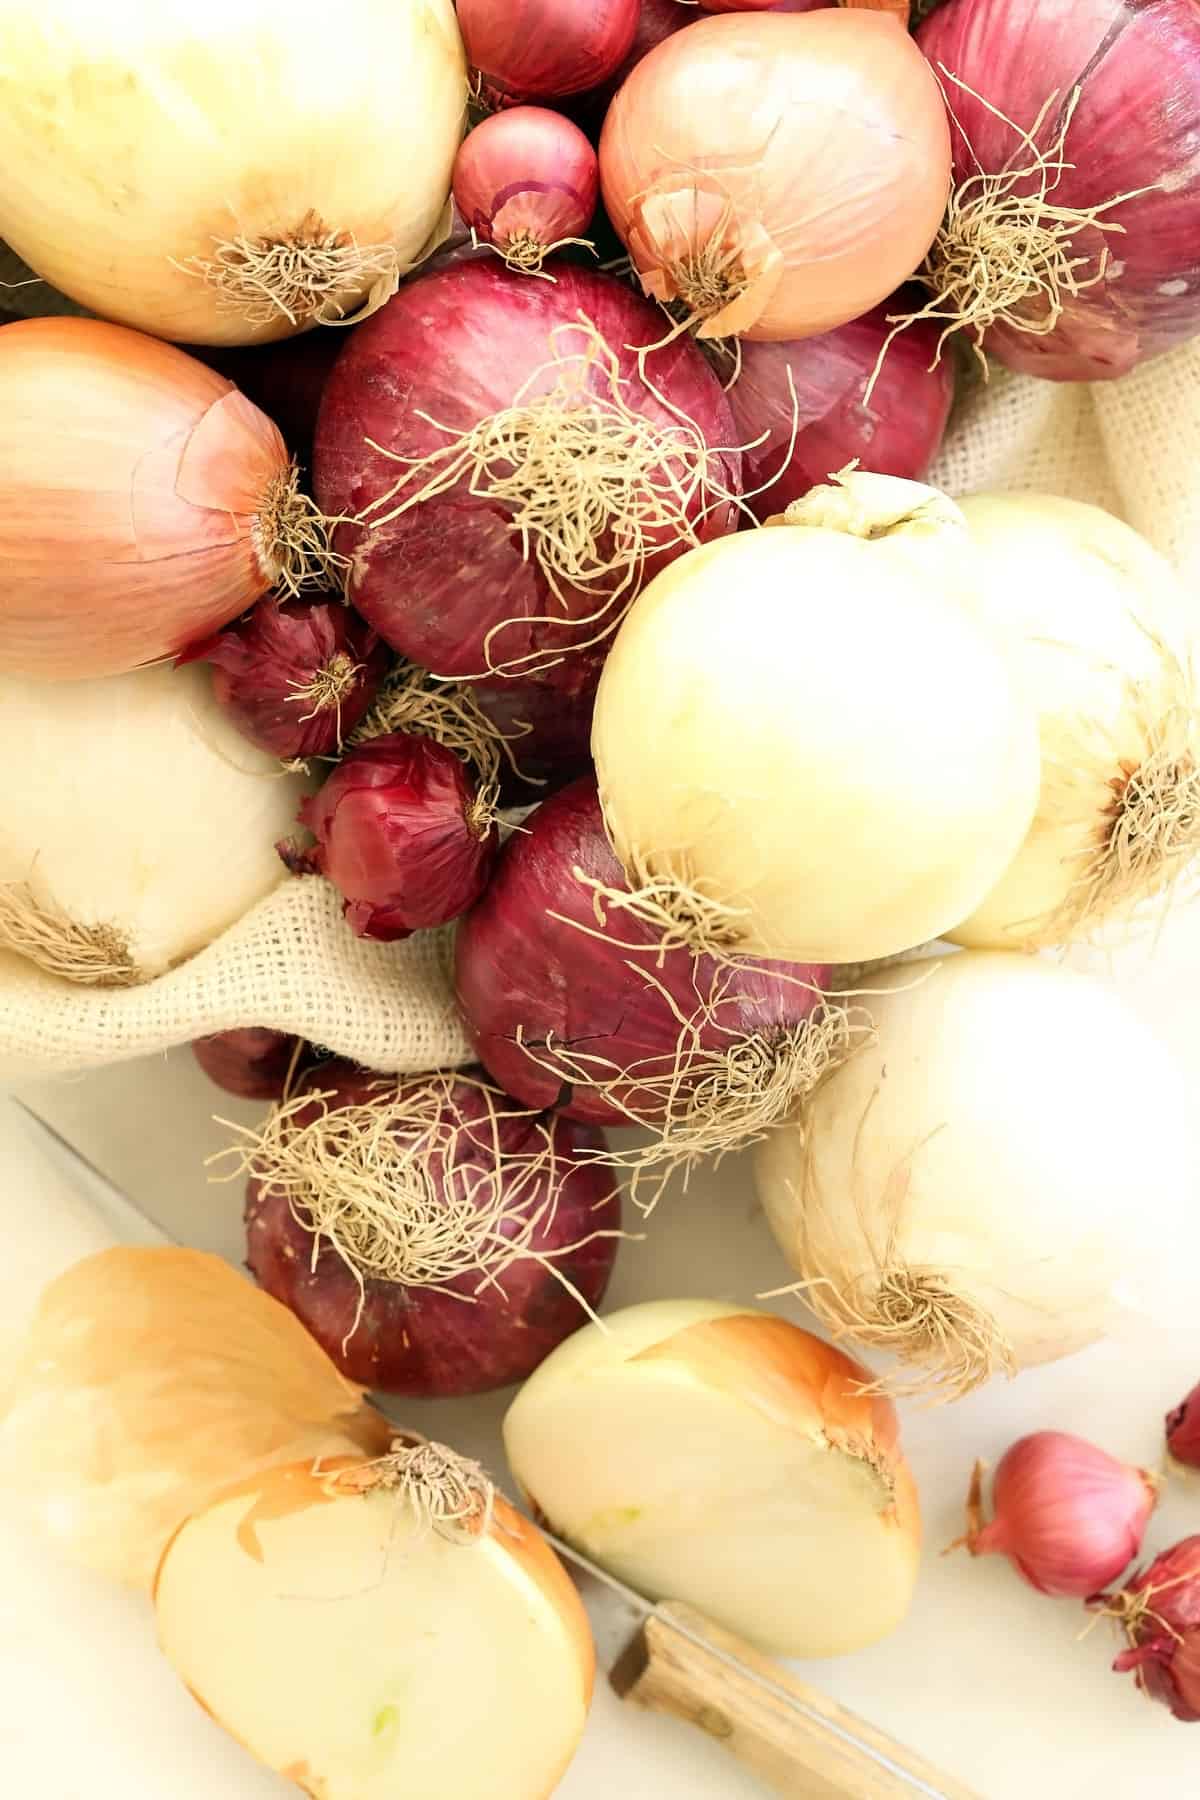 Health Benefits of Eating Onions - The Harvest Kitchen